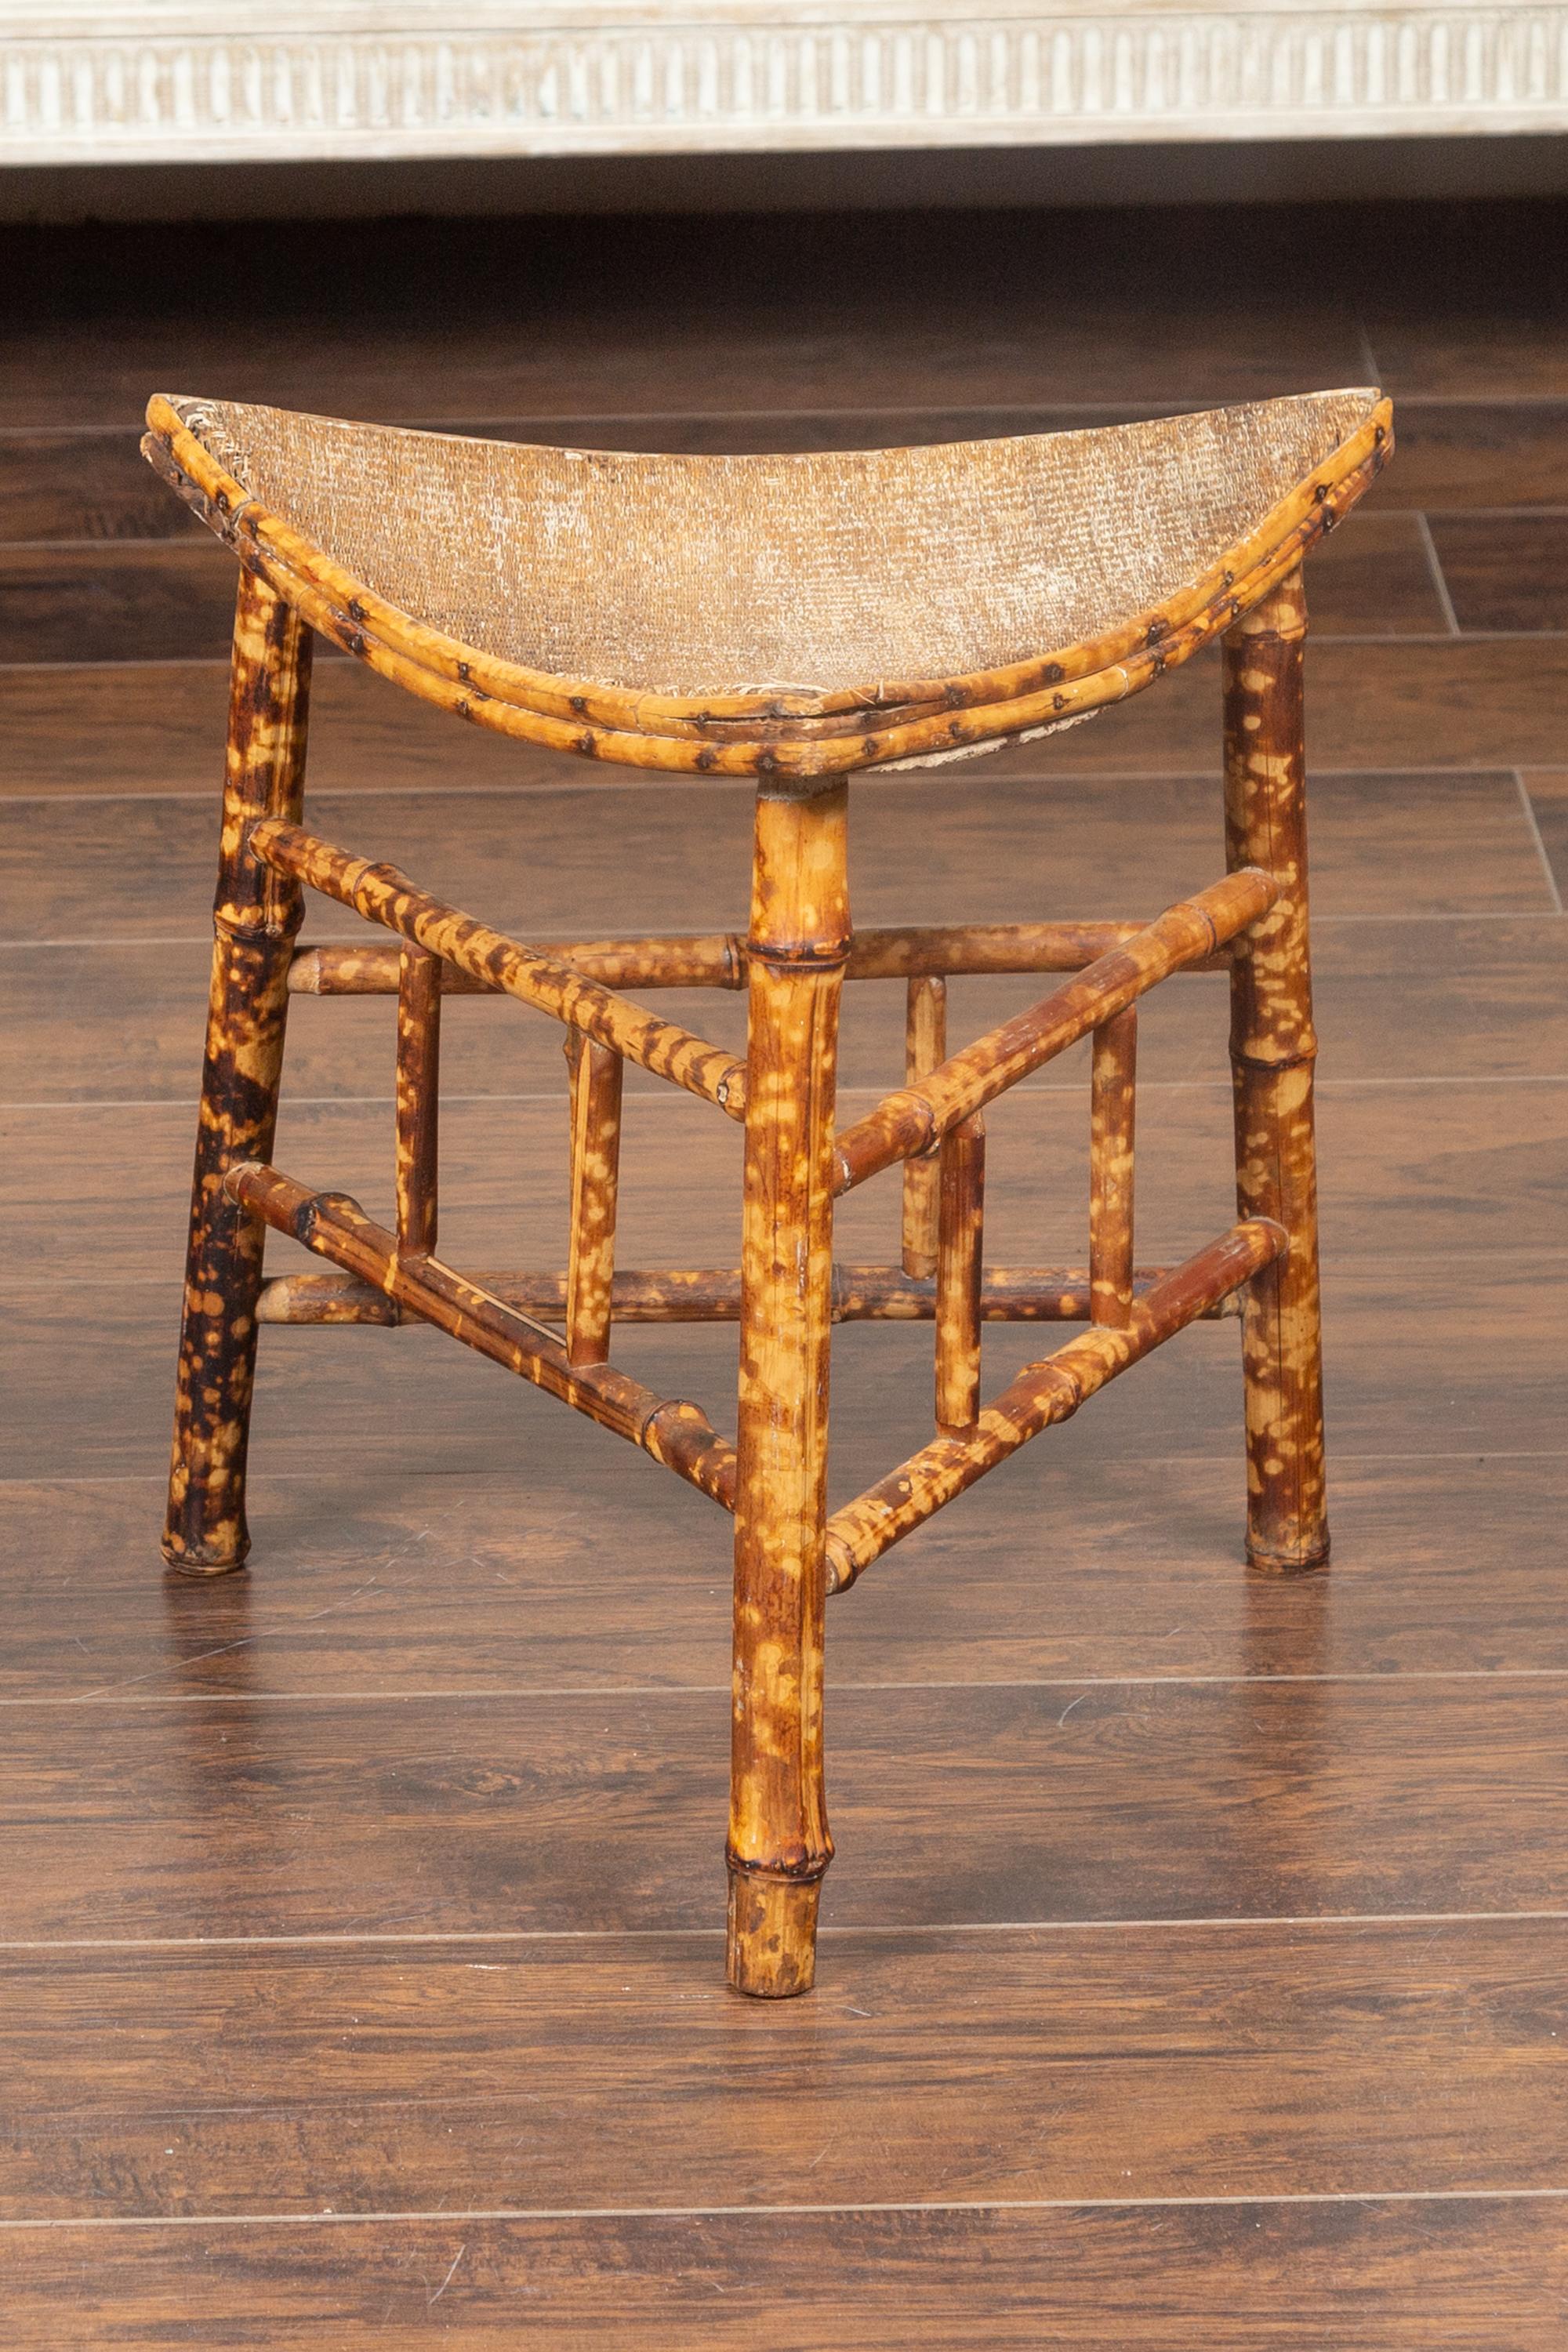 A French Egyptian Revival faux bamboo Thebes stool from the mid-20th century, with curving rattan seat. Born in France during the second quarter of the 20th century, this handsome Thebes stool features a triangular curving seat, resting on a stylish